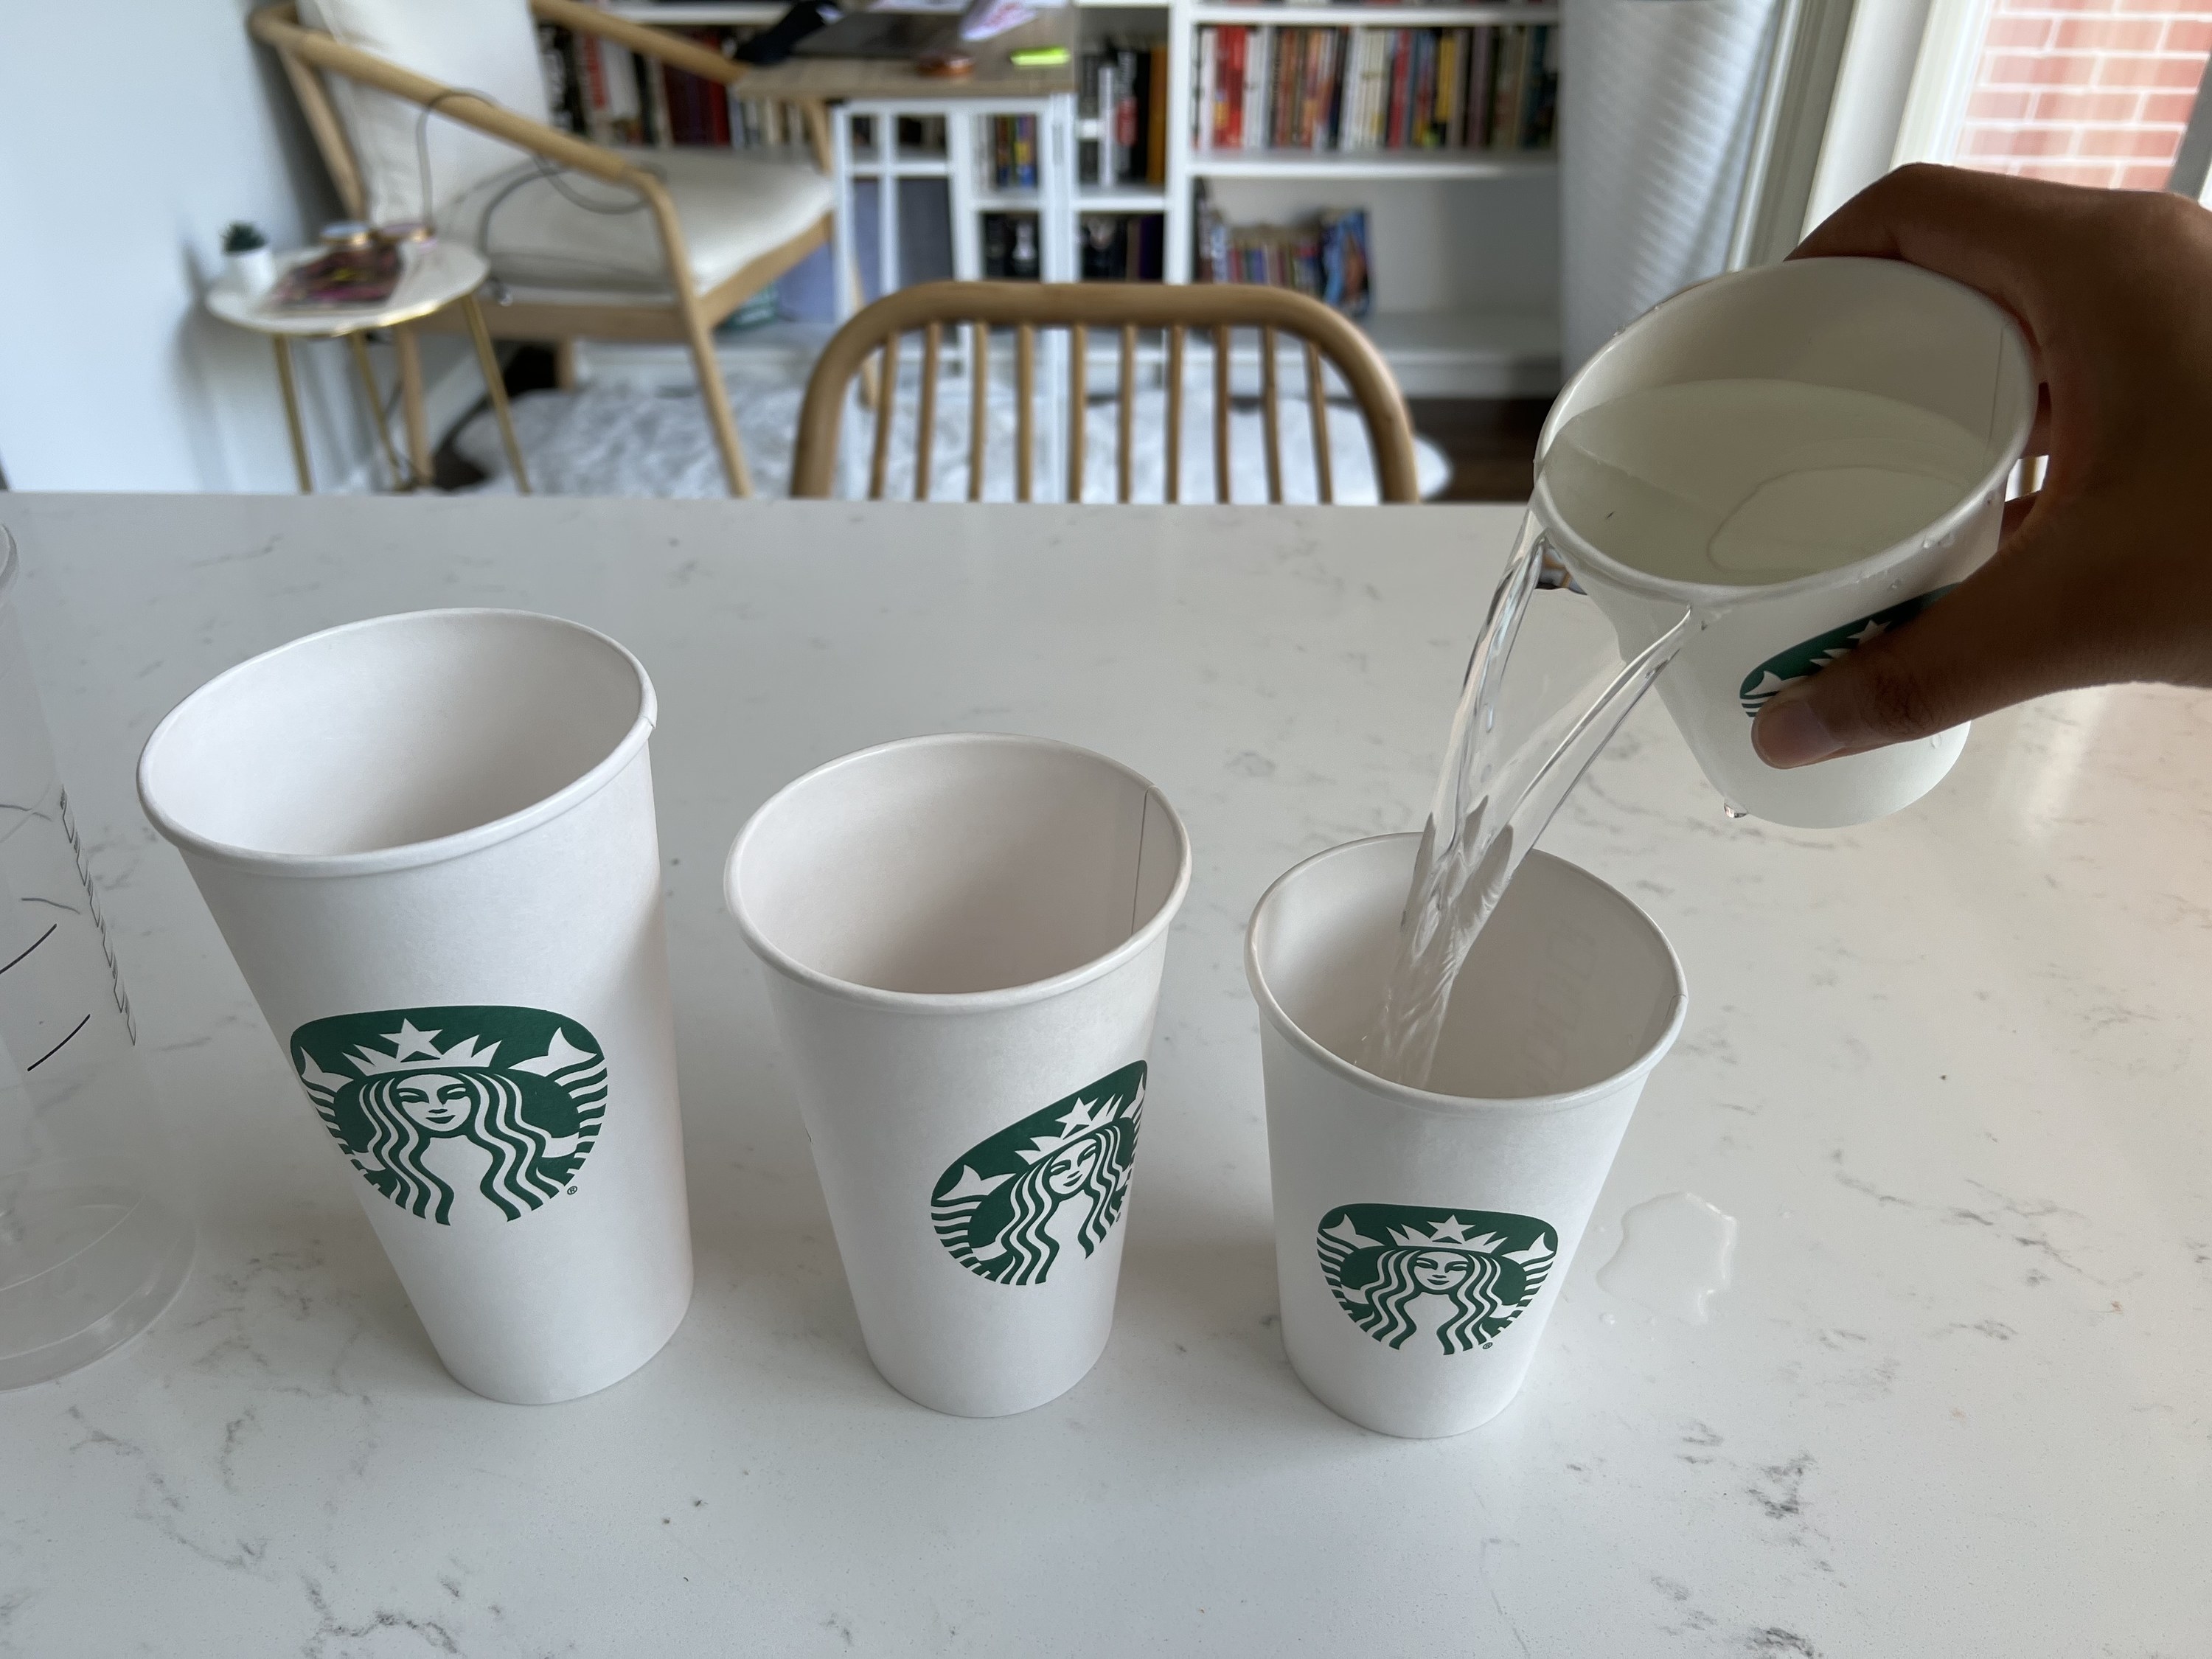 Debunking The Starbucks Cup Size Scam